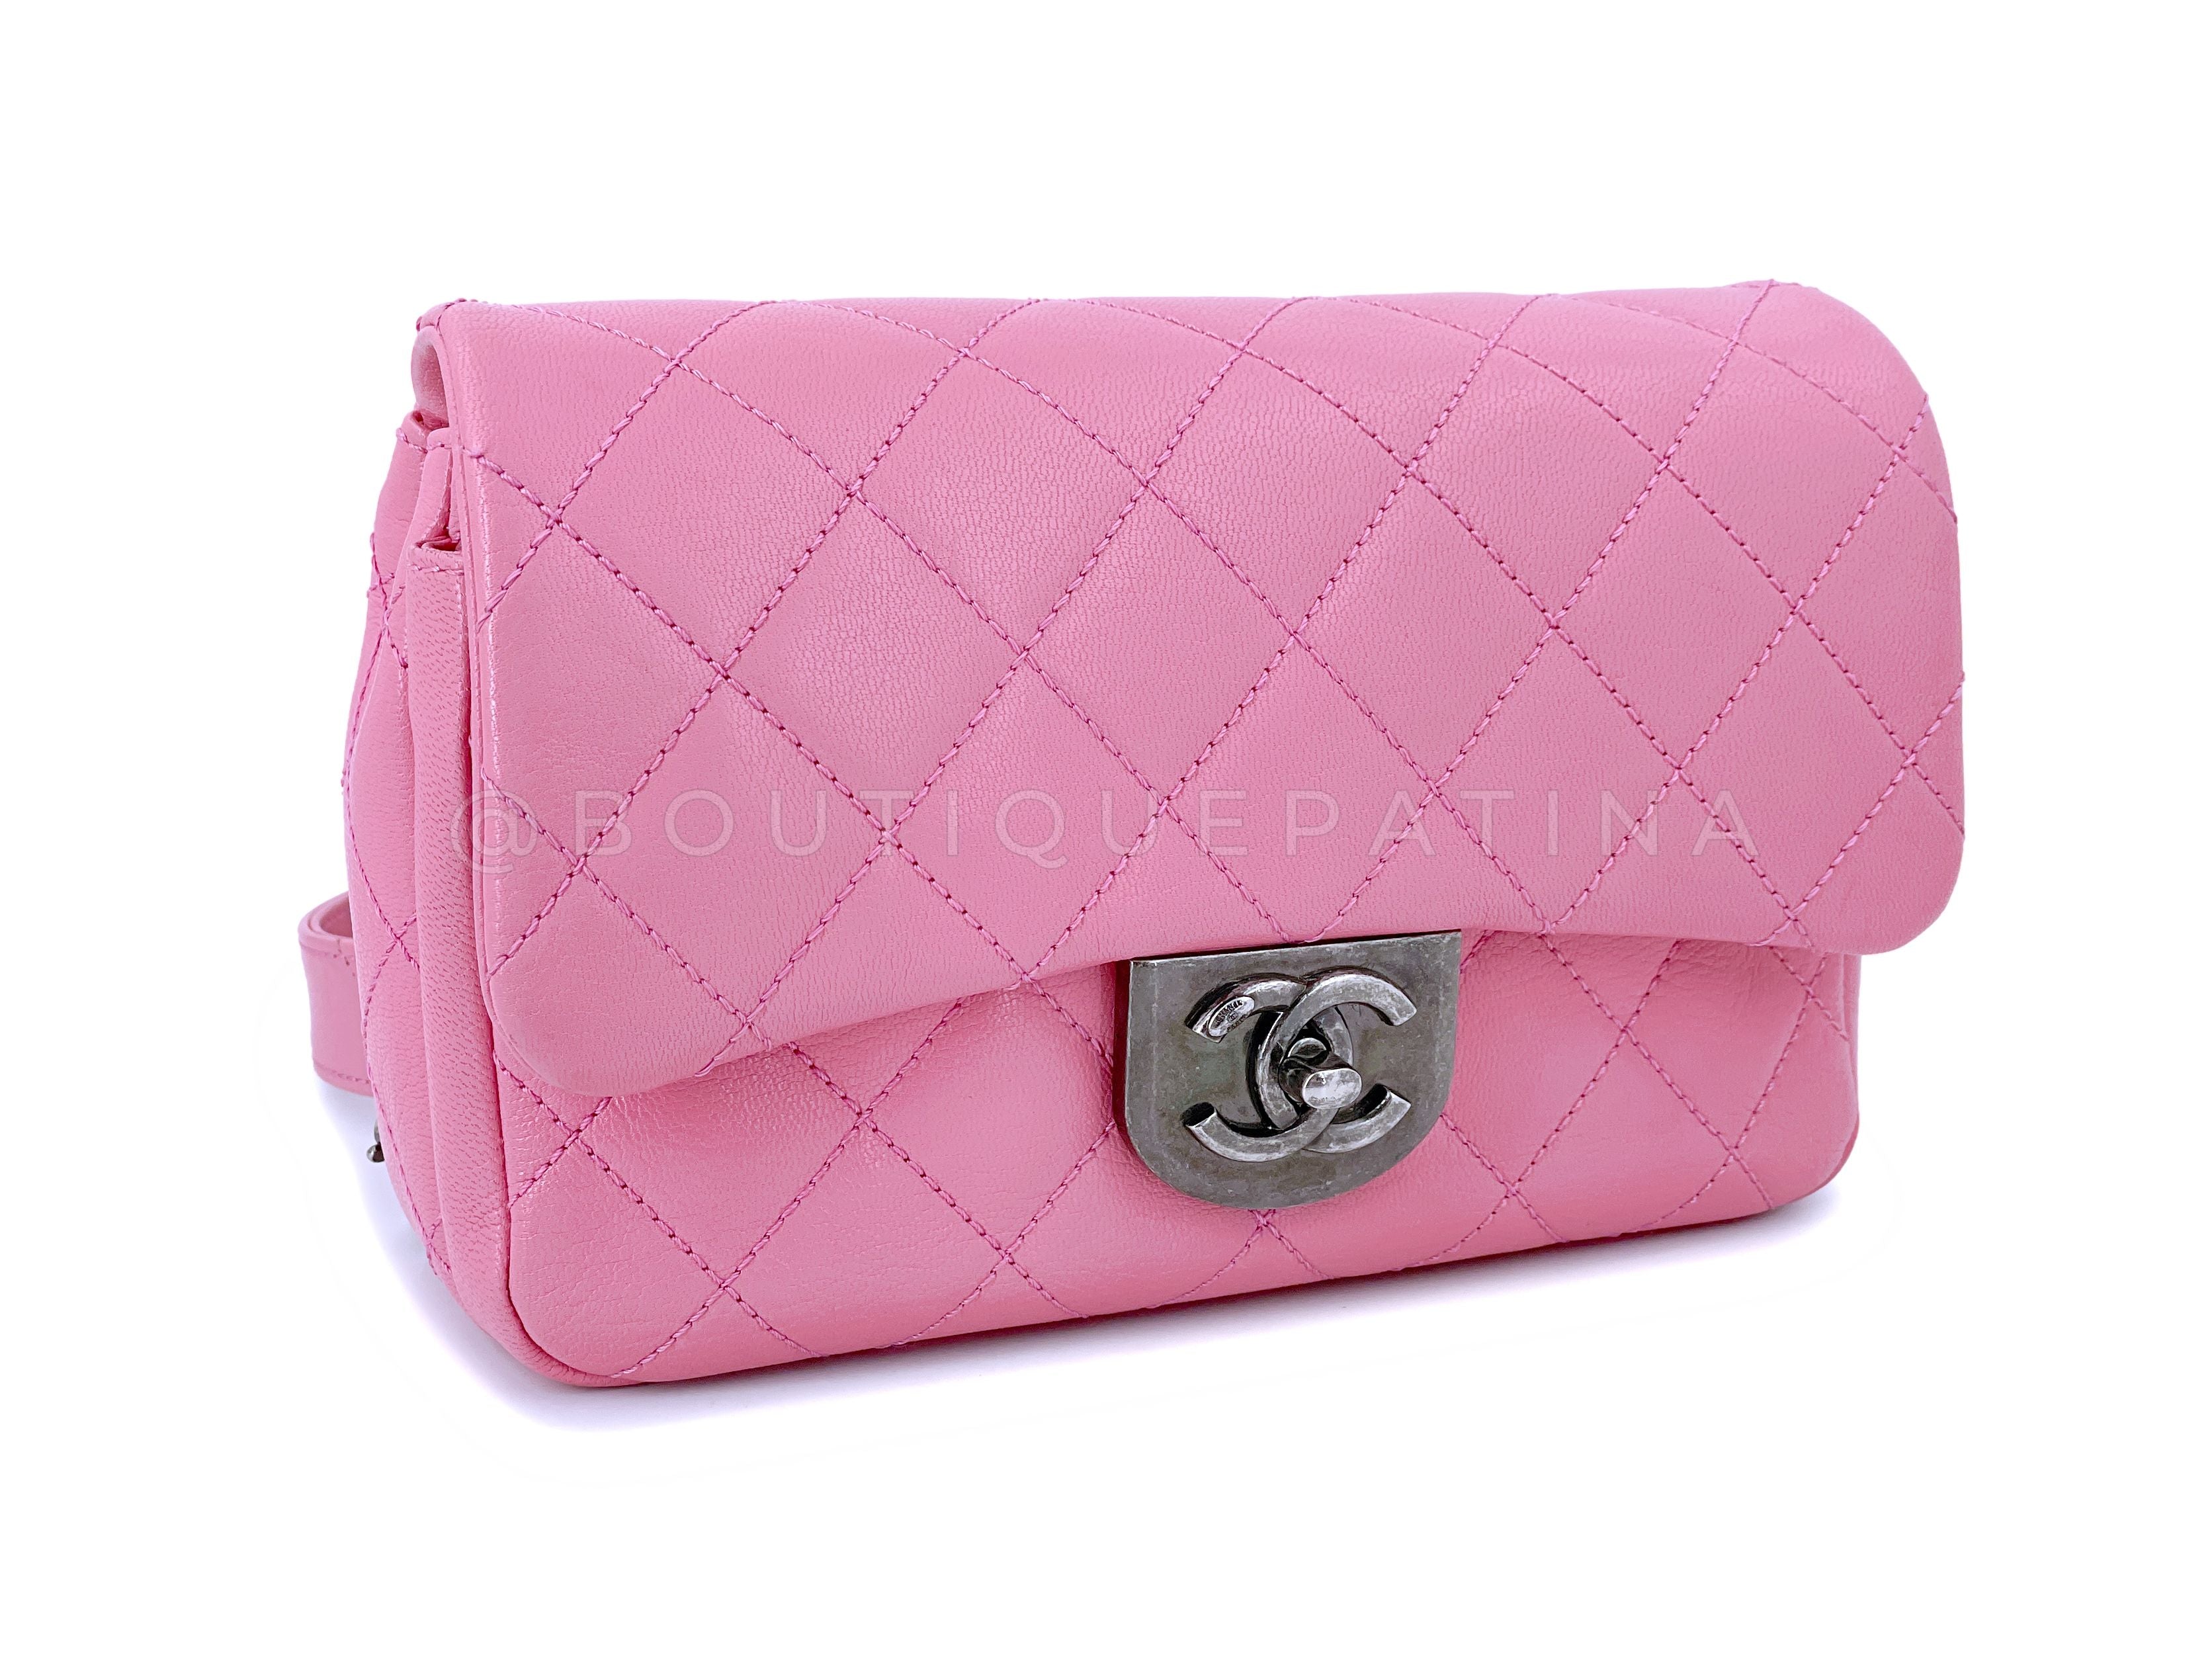 Chanel 2015 Pink Goatskin Double Carry Multichain Quilted Medium Flap Bag RHW